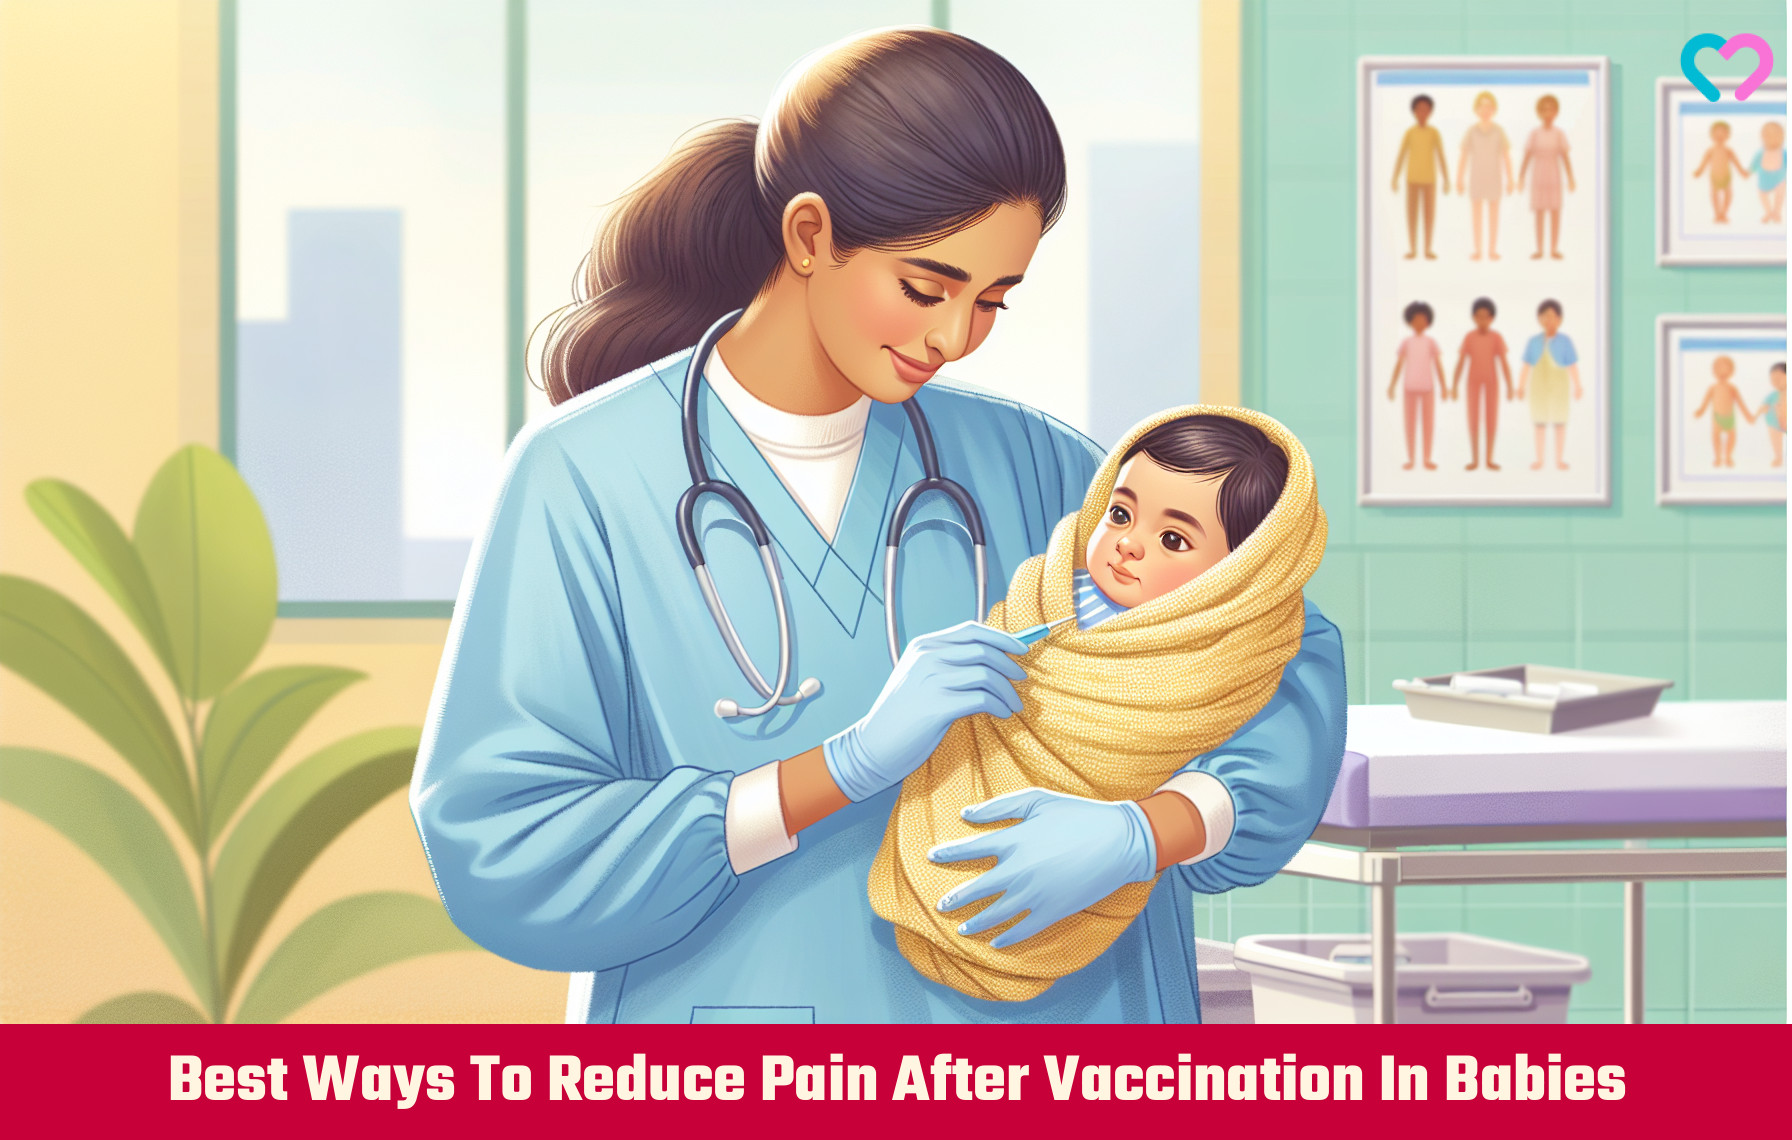 Vaccination In Babies_illustration